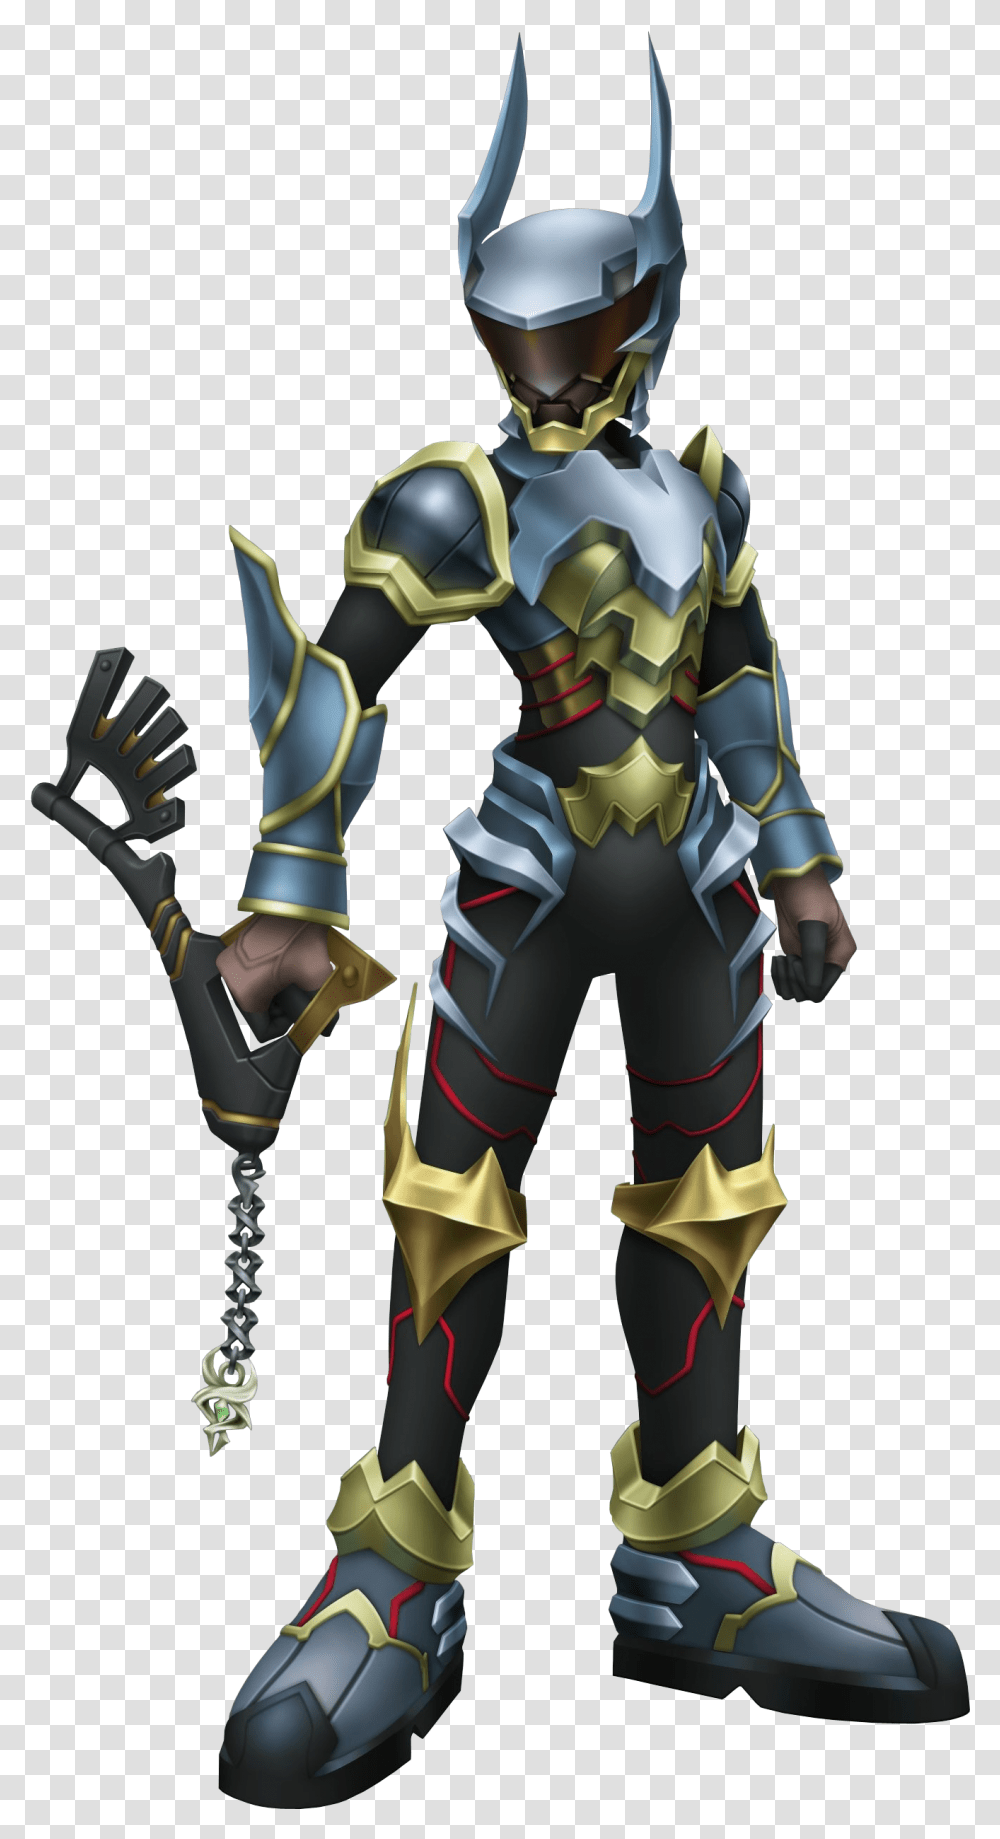 Ventus In Armor Kingdom Hearts Birth By Sleep Ventus Armor, Person, Human, Knight, Costume Transparent Png